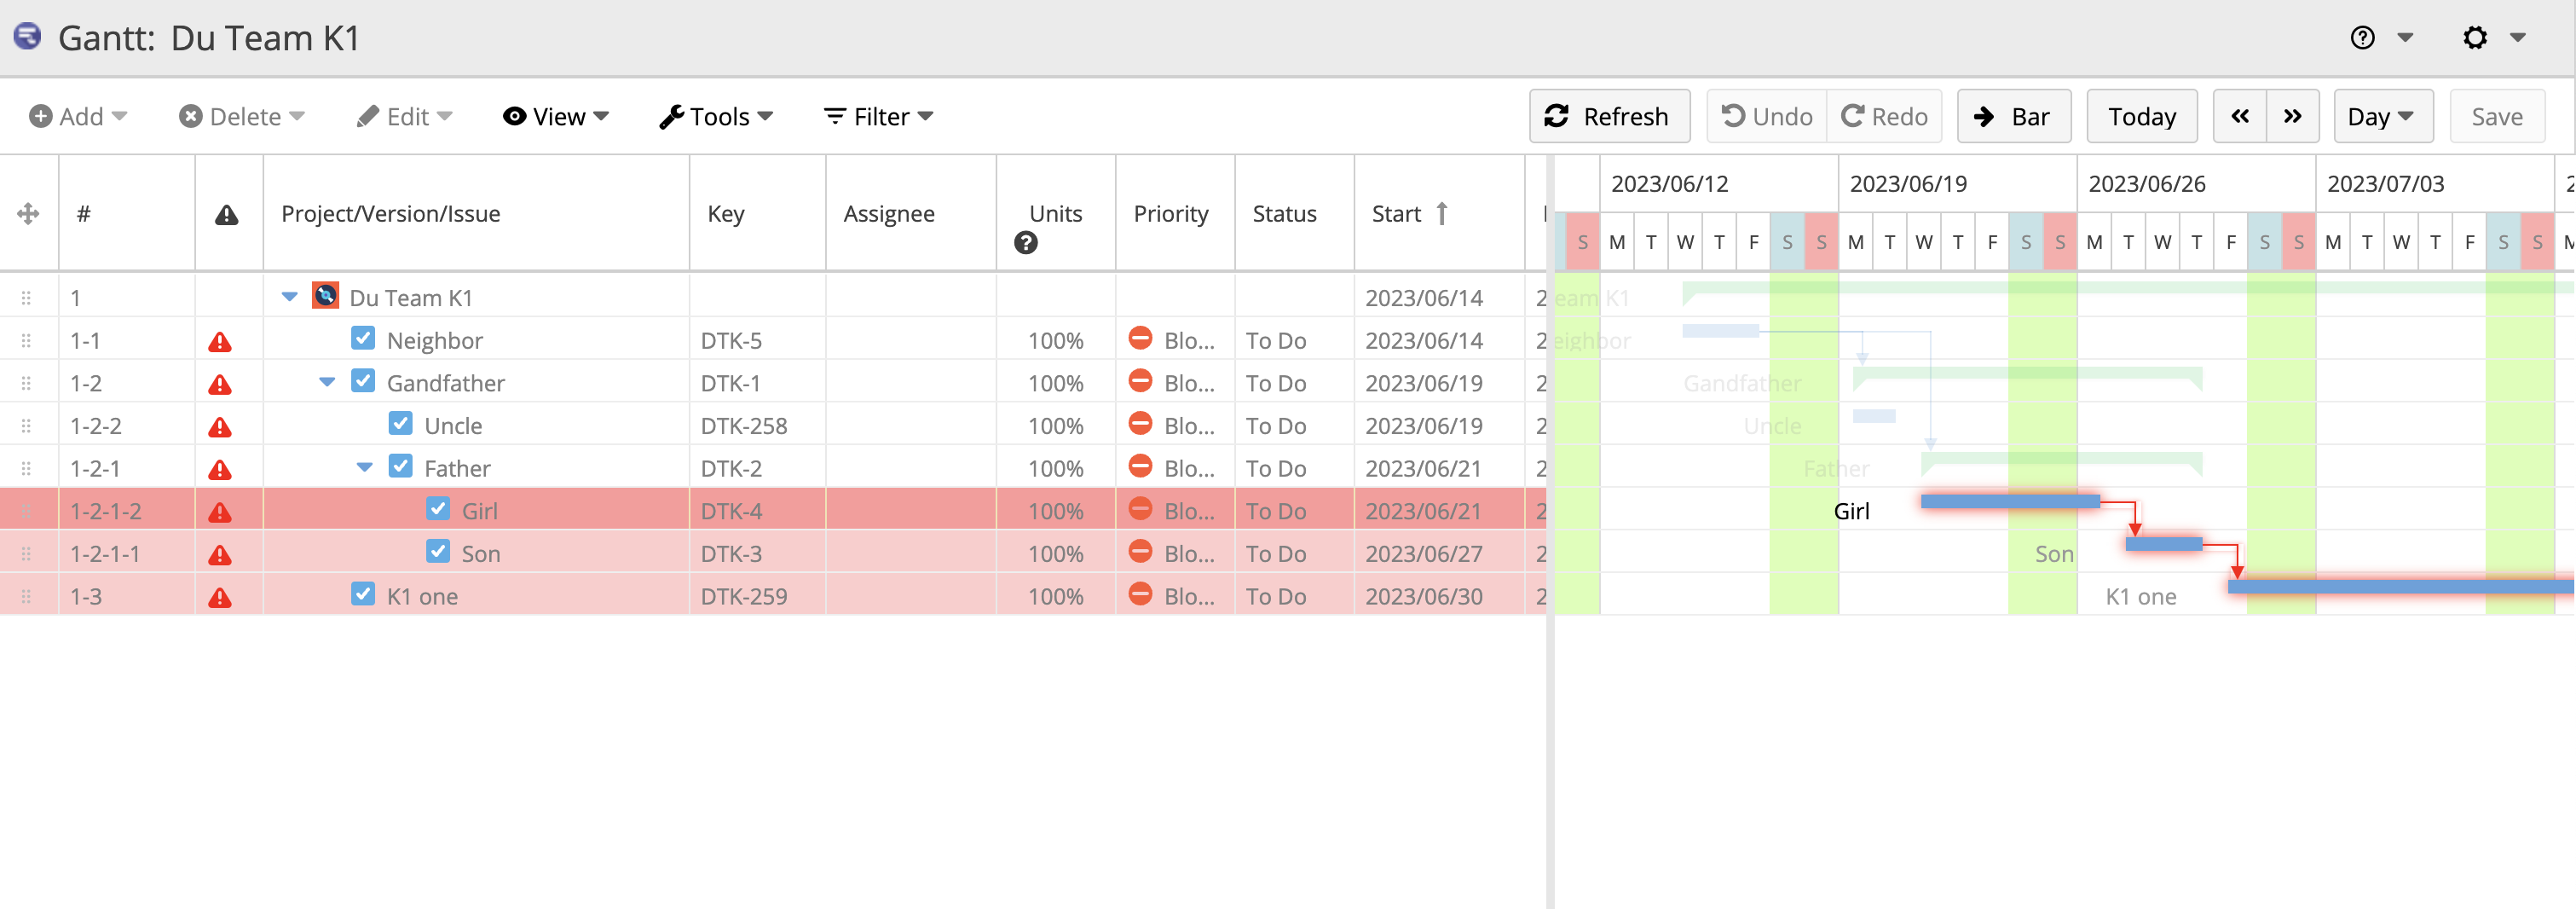 Highlighting critical path rows allows users to identify bottlenecks or prioritize tasks